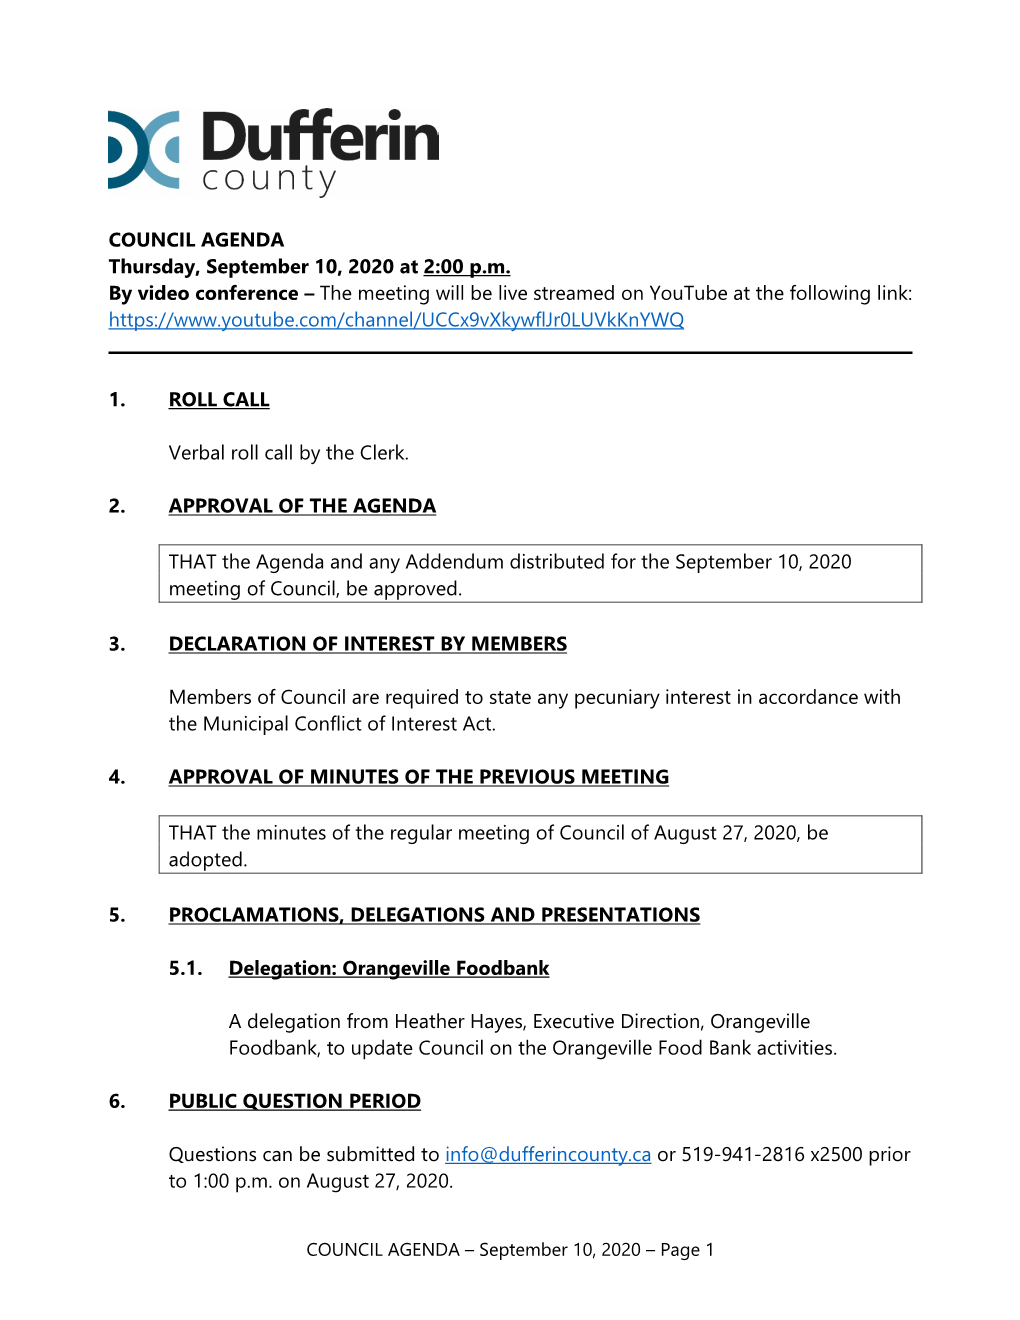 COUNCIL AGENDA – September 10, 2020 – Page 1 7